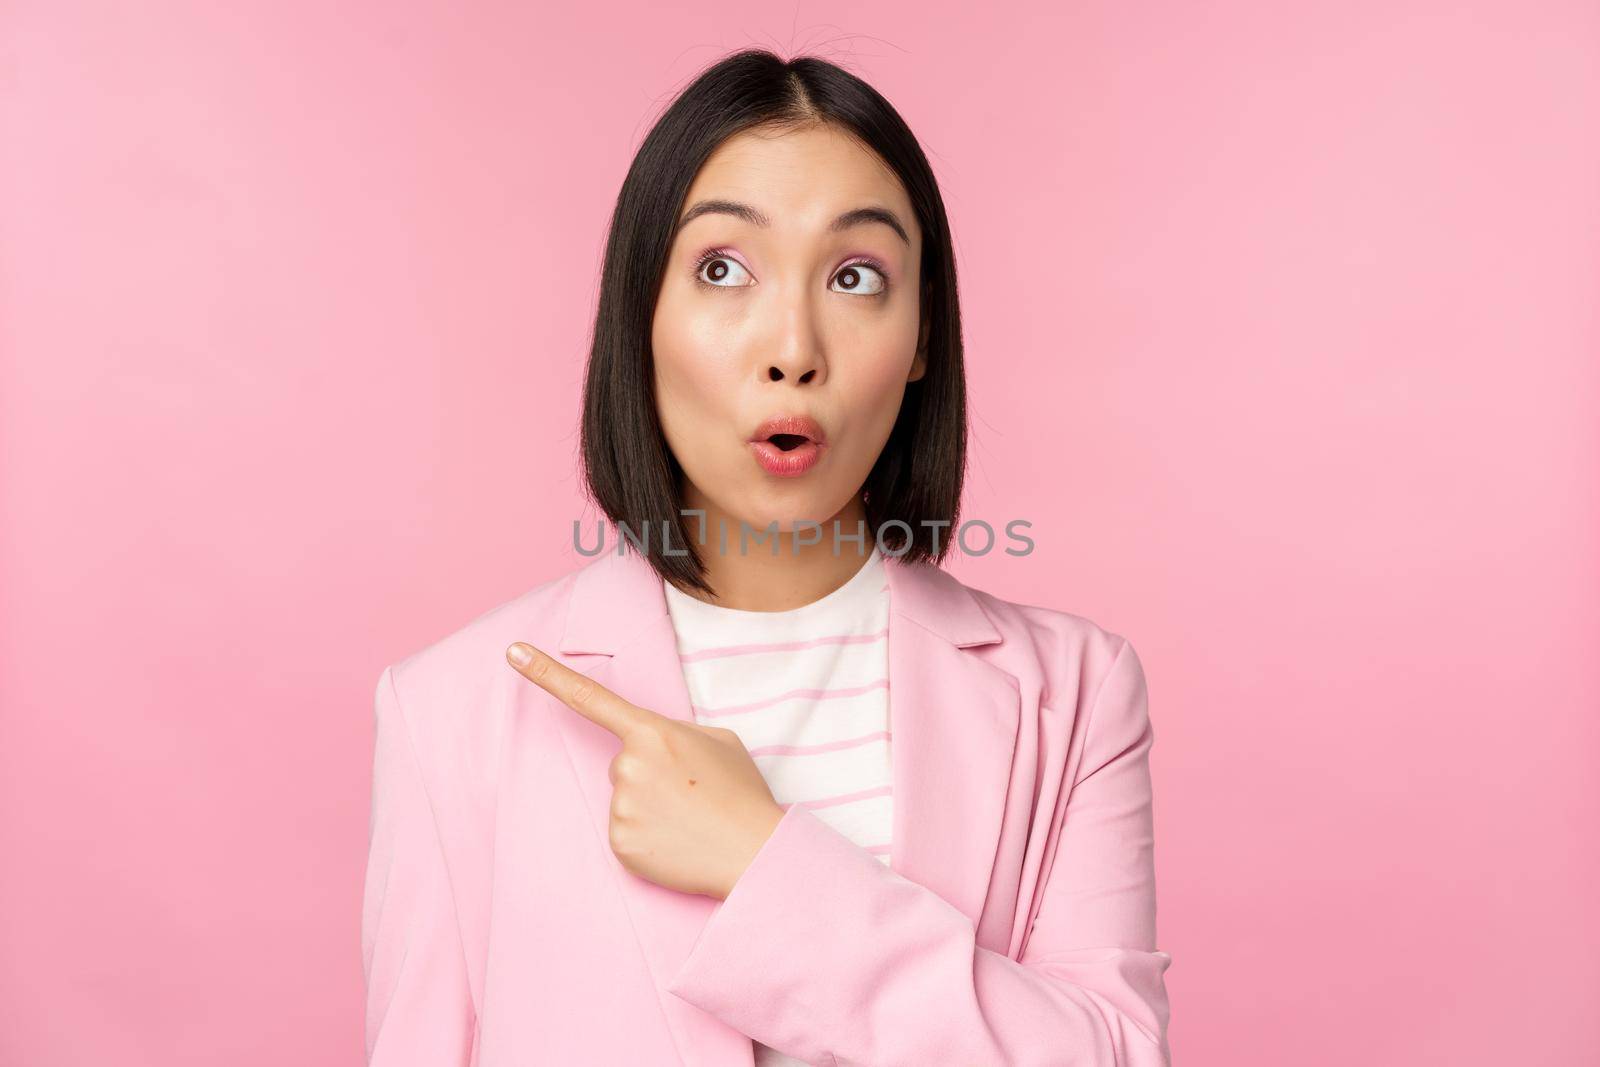 Portrait of saleswoman, korean businesswoman pointing and looking left with surprised, intrigued face expression, posing in suit over pink background.